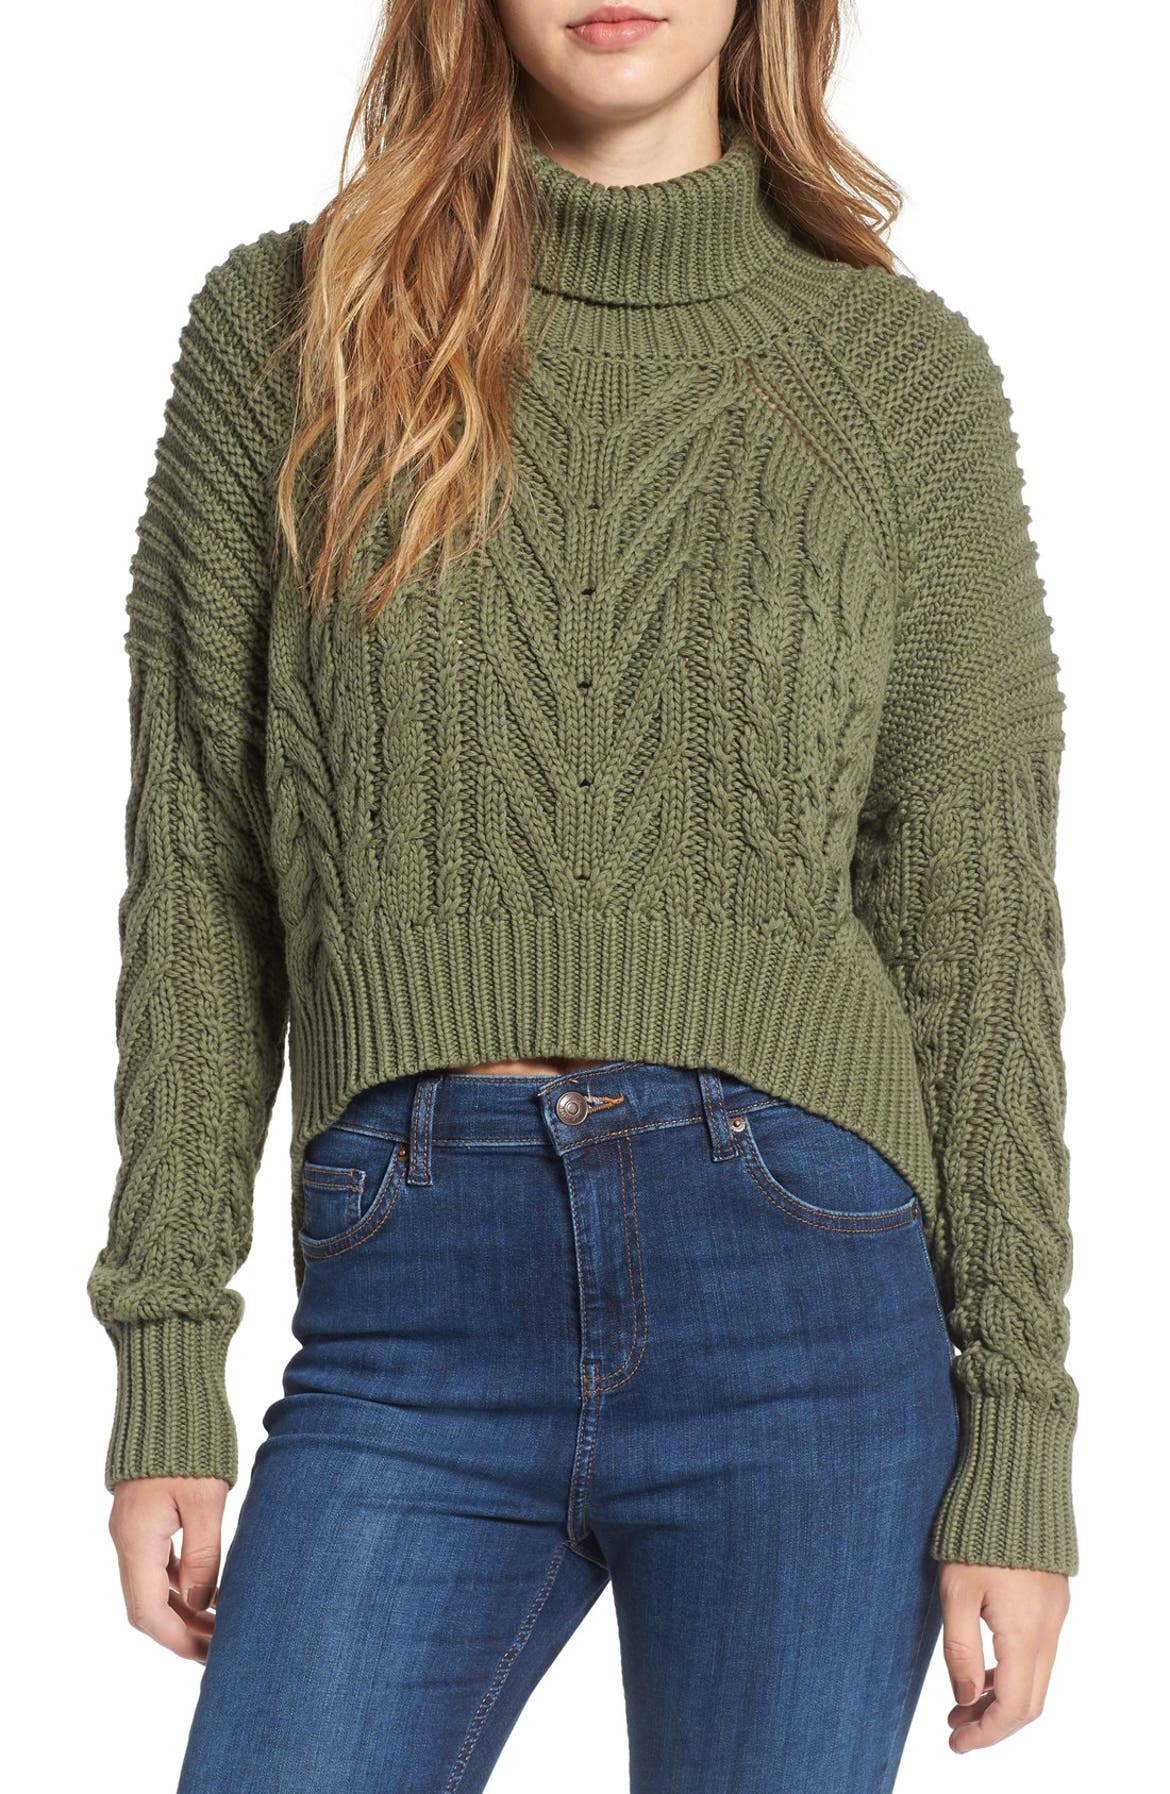 C/MEO 'Two Can' Cable Knit Cotton Turtleneck Sweater | Nordstrom